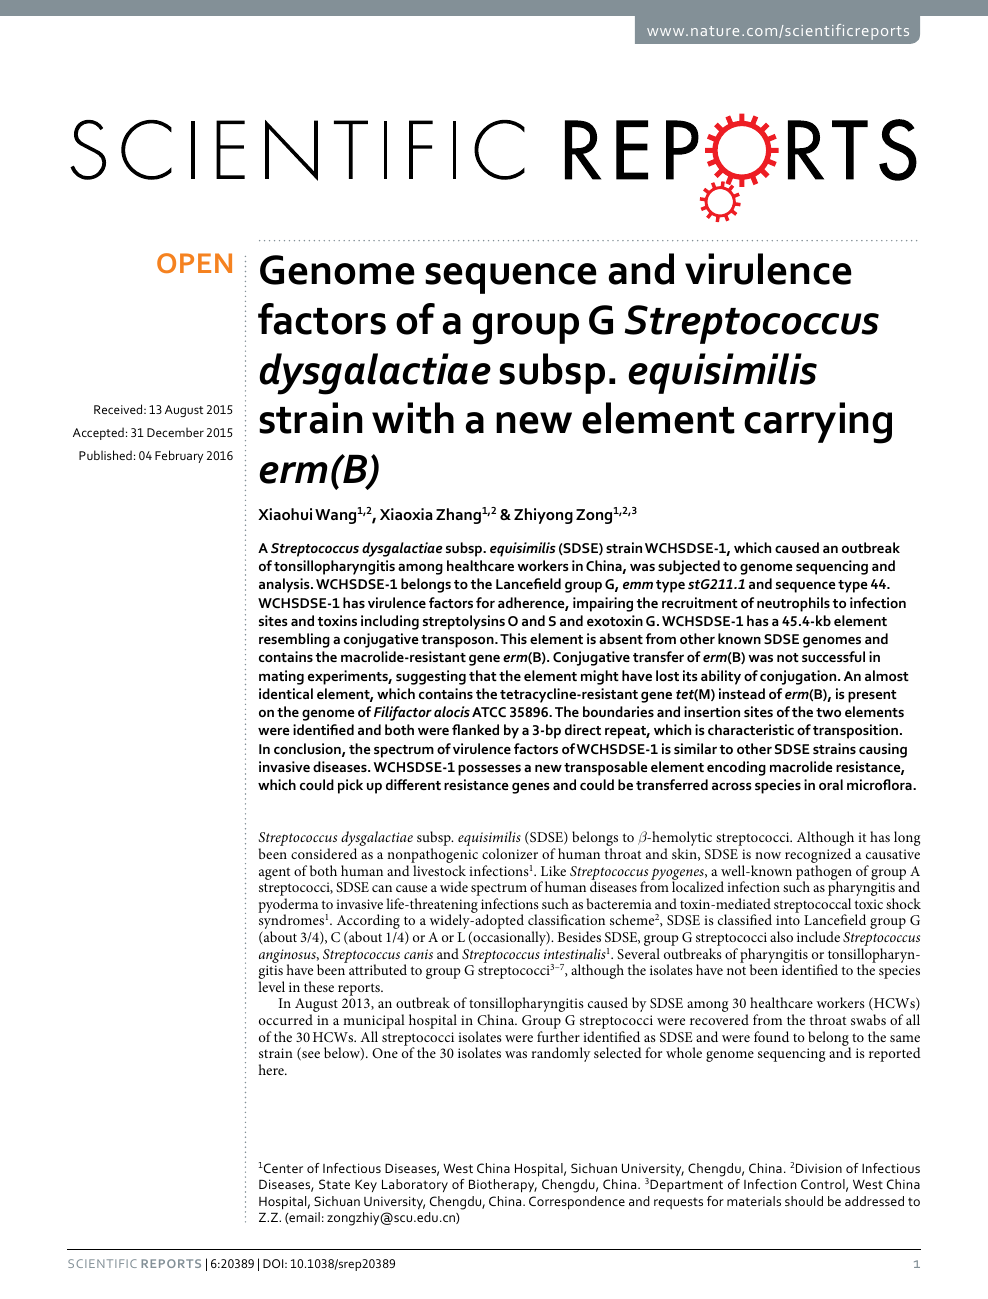 Genome Sequence And Virulence Factors Of A Group G Streptococcus Dysgalactiae Subsp Equisimilis Strain With A New Element Carrying Erm B Topic Of Research Paper In Biological Sciences Download Scholarly Article Pdf